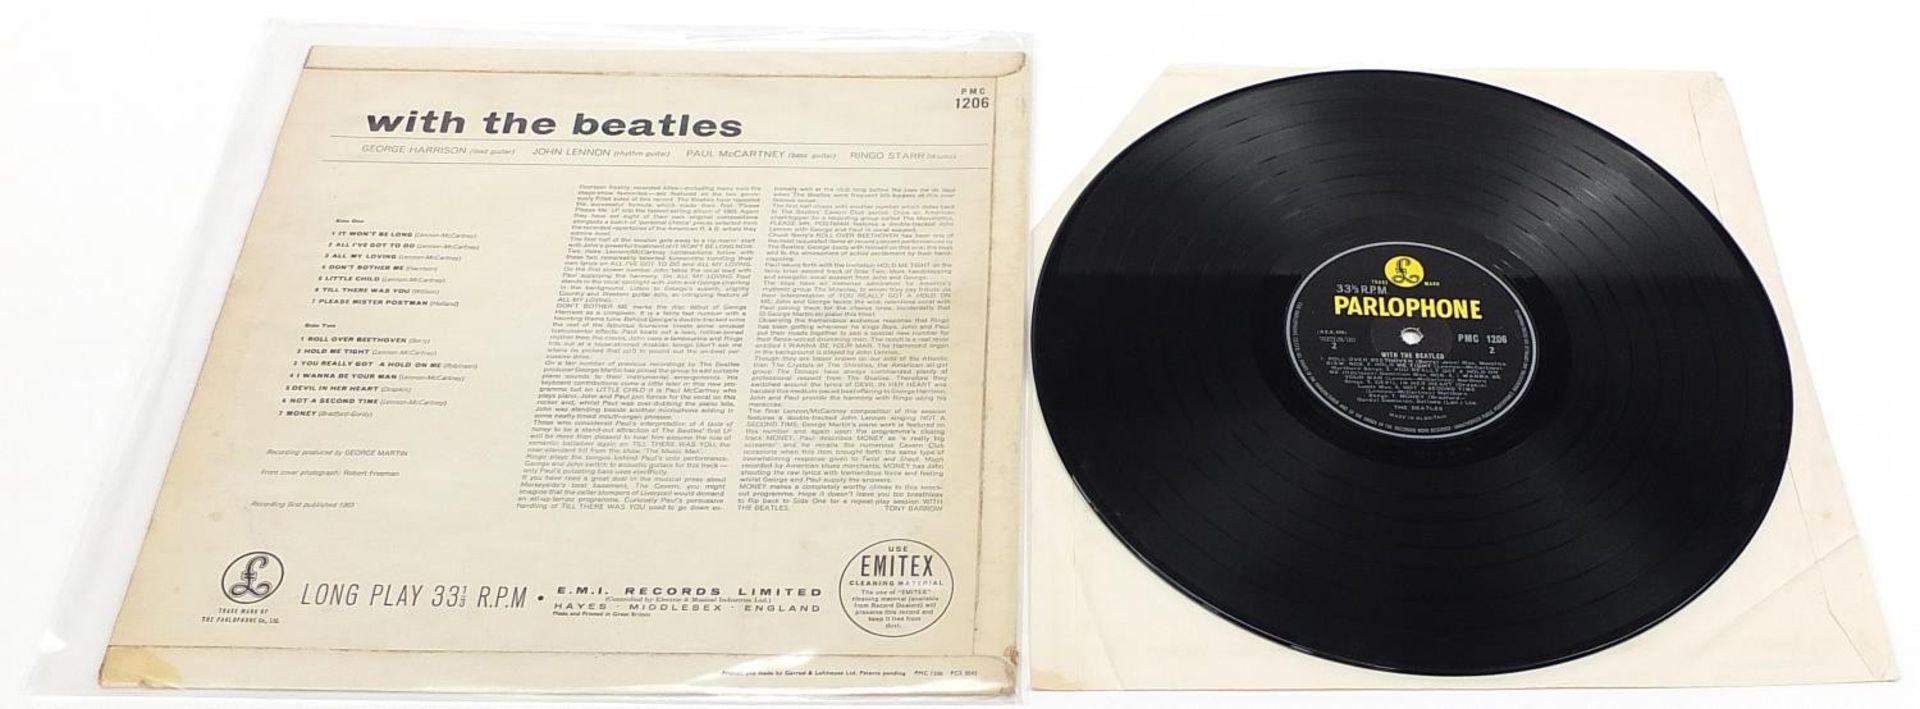 Five With the Beatles vinyl LP records by The Beatles, each mono PMC1206 - Image 9 of 11